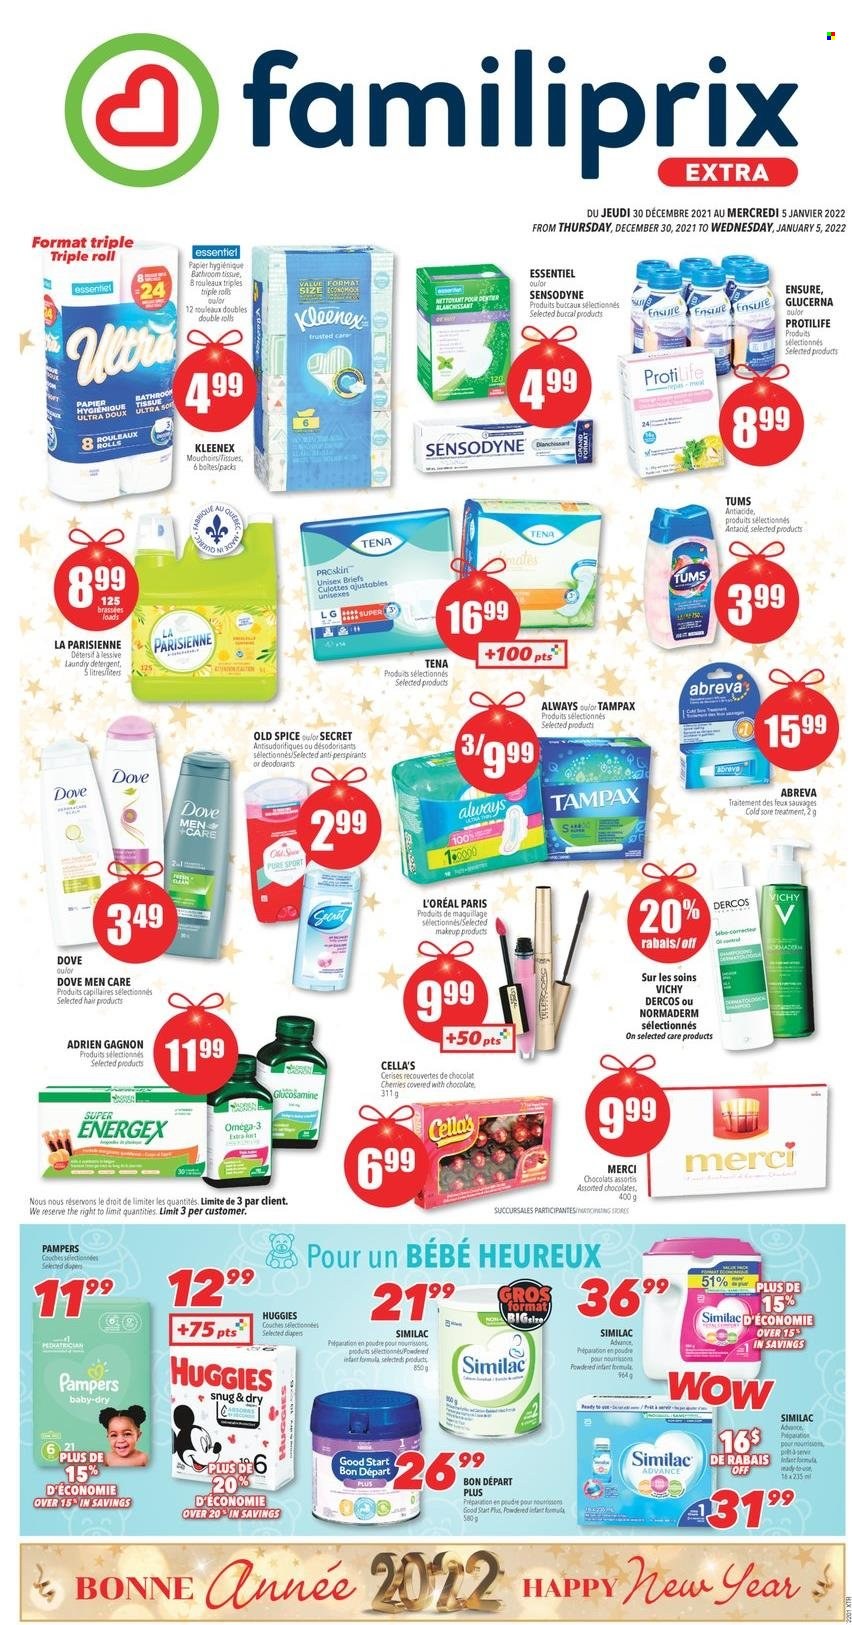 thumbnail - Familiprix Extra Flyer - December 30, 2021 - January 05, 2022 - Sales products - chocolate, Merci, spice, Kleenex, tissues, laundry detergent, Vichy, Abreva, L’Oréal, glucosamine, Omega-3, Glucerna, detergent, Dove, Tampax, Huggies, Pampers, Old Spice, Sensodyne, deodorant. Page 1.